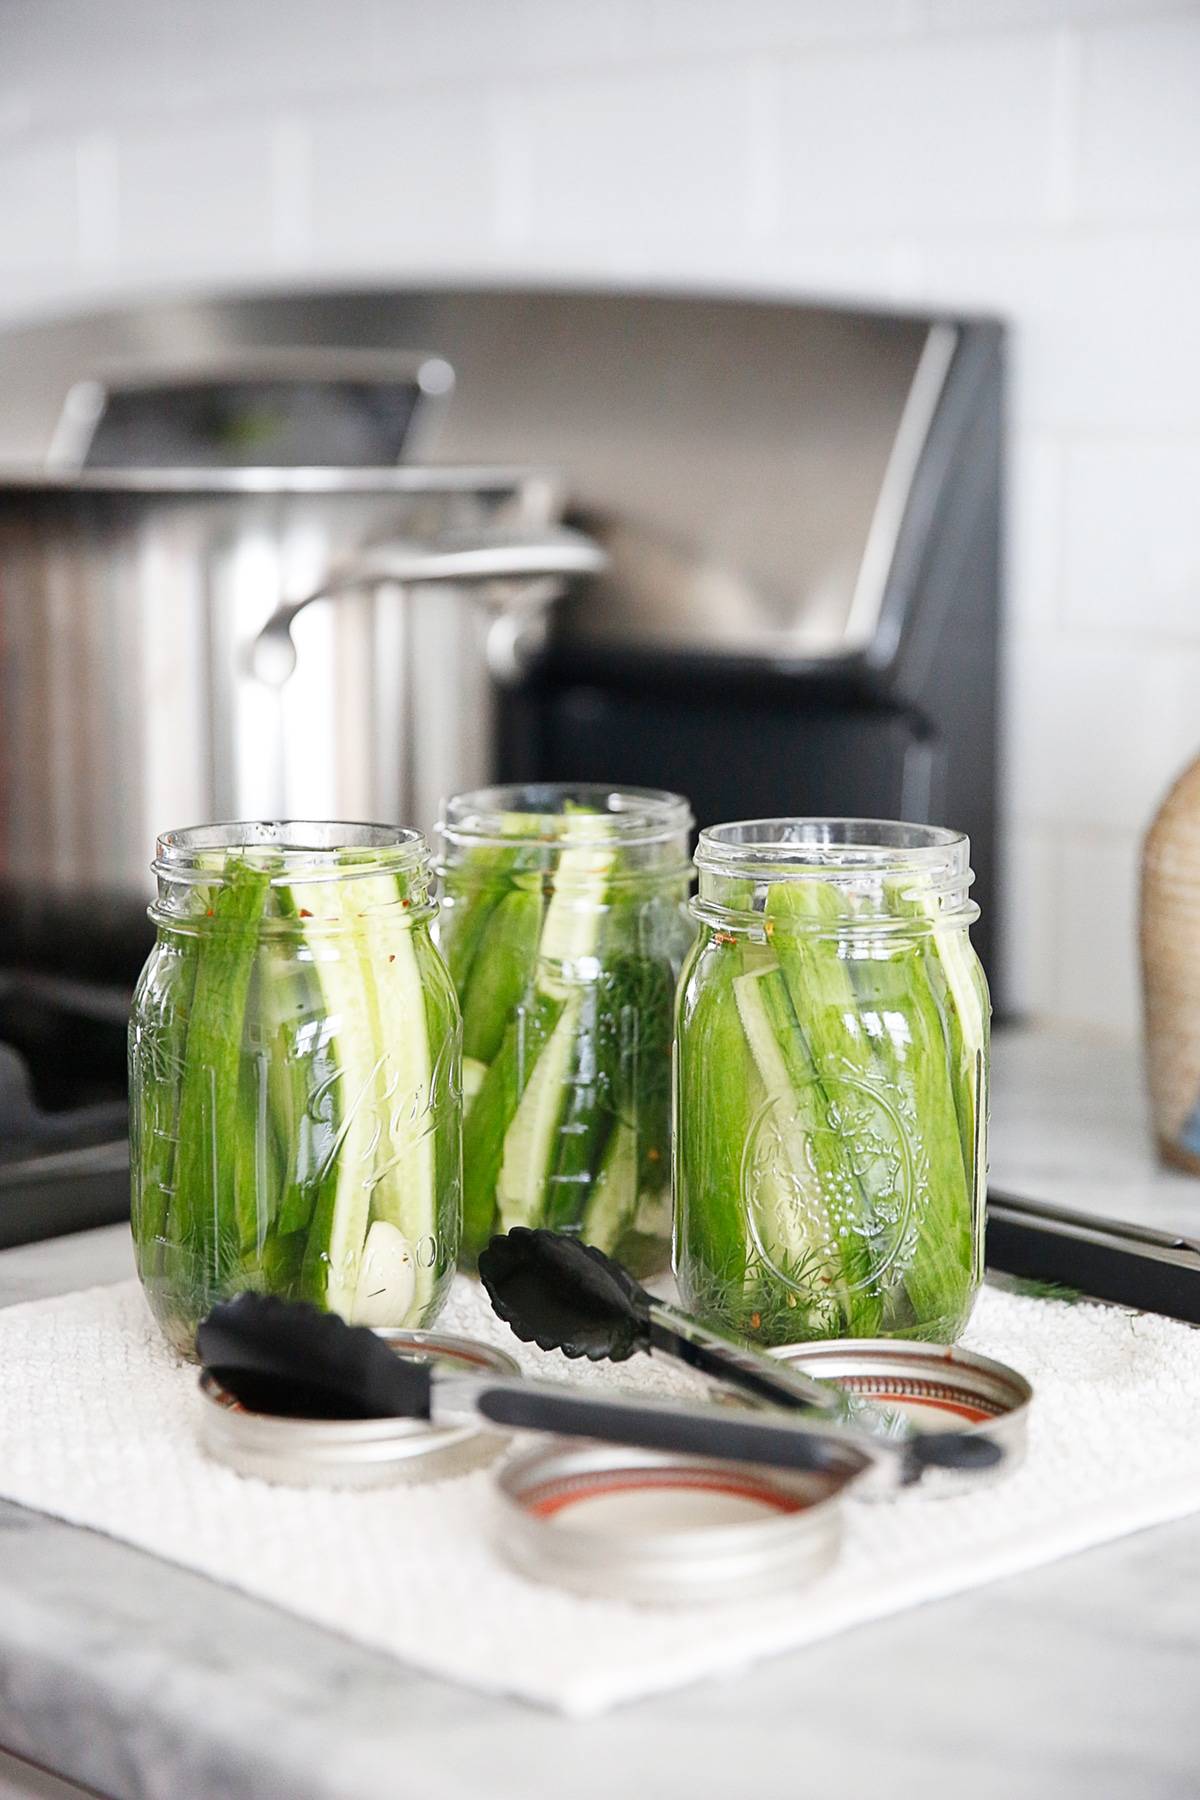 Canning Cucumbers to Make Quick Dill Pickles